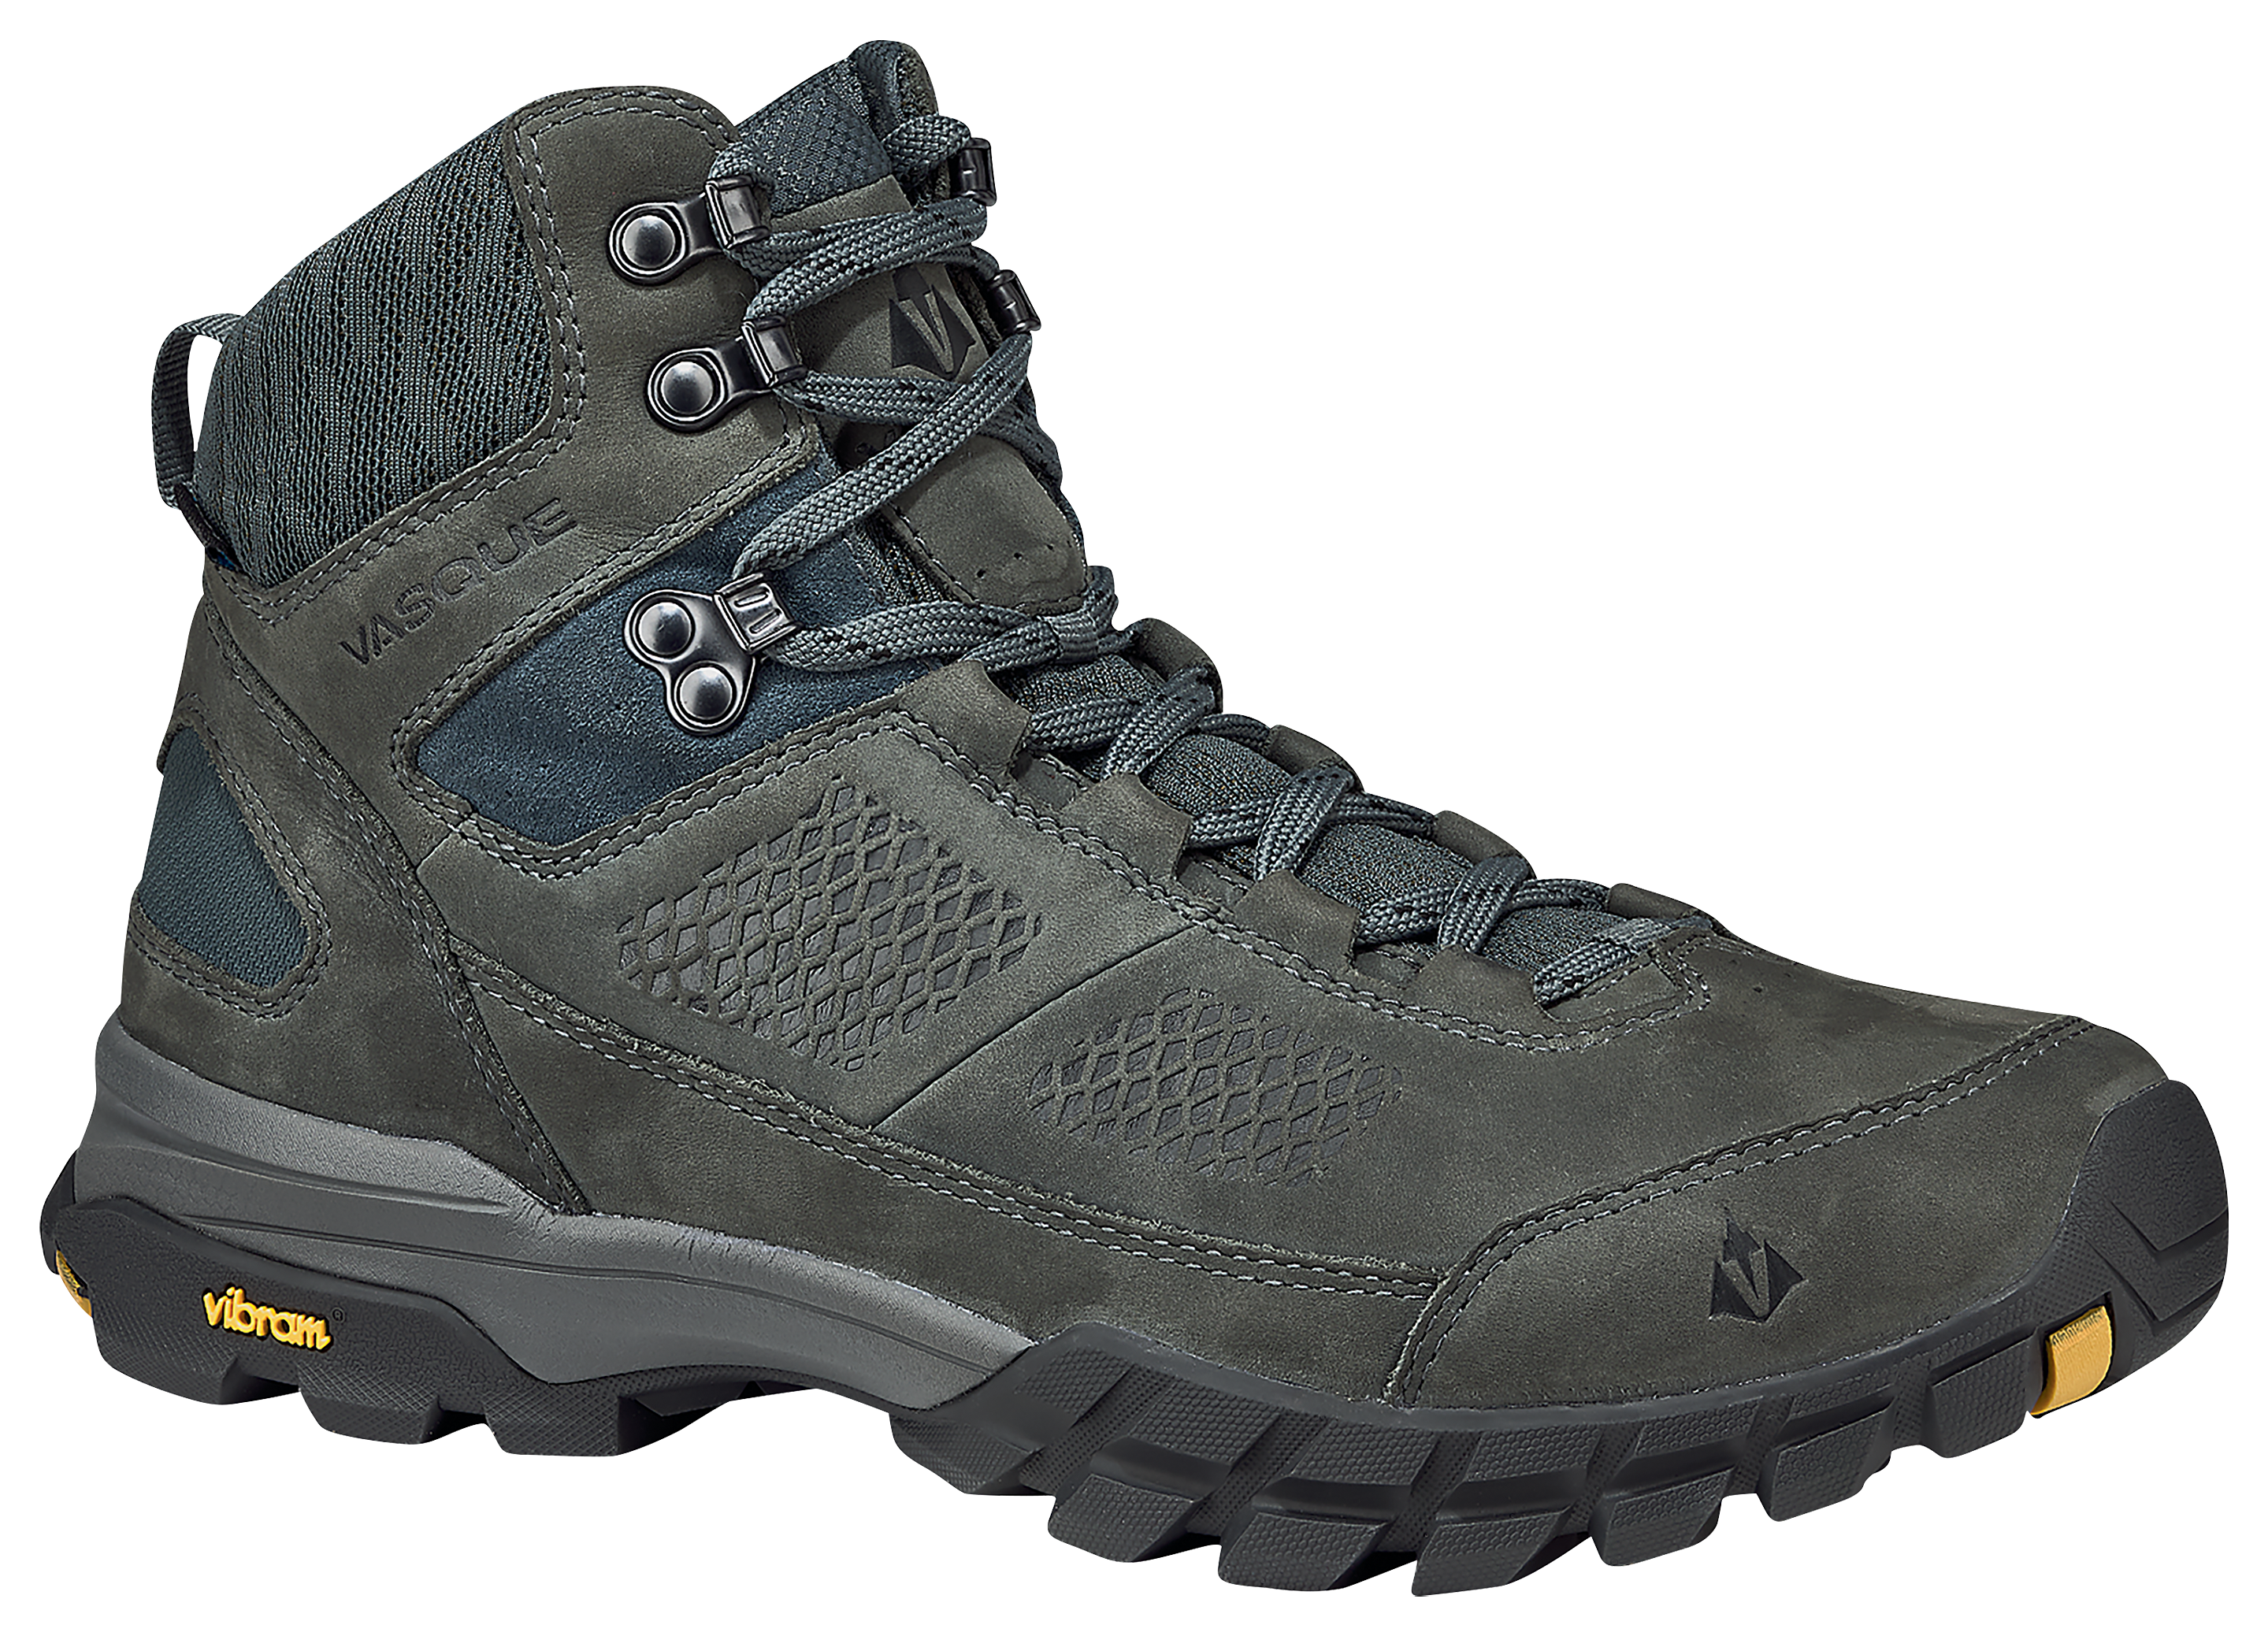 Vasque Talus AT UltraDry Waterproof Hiking Boots for Men | Bass Pro Shops